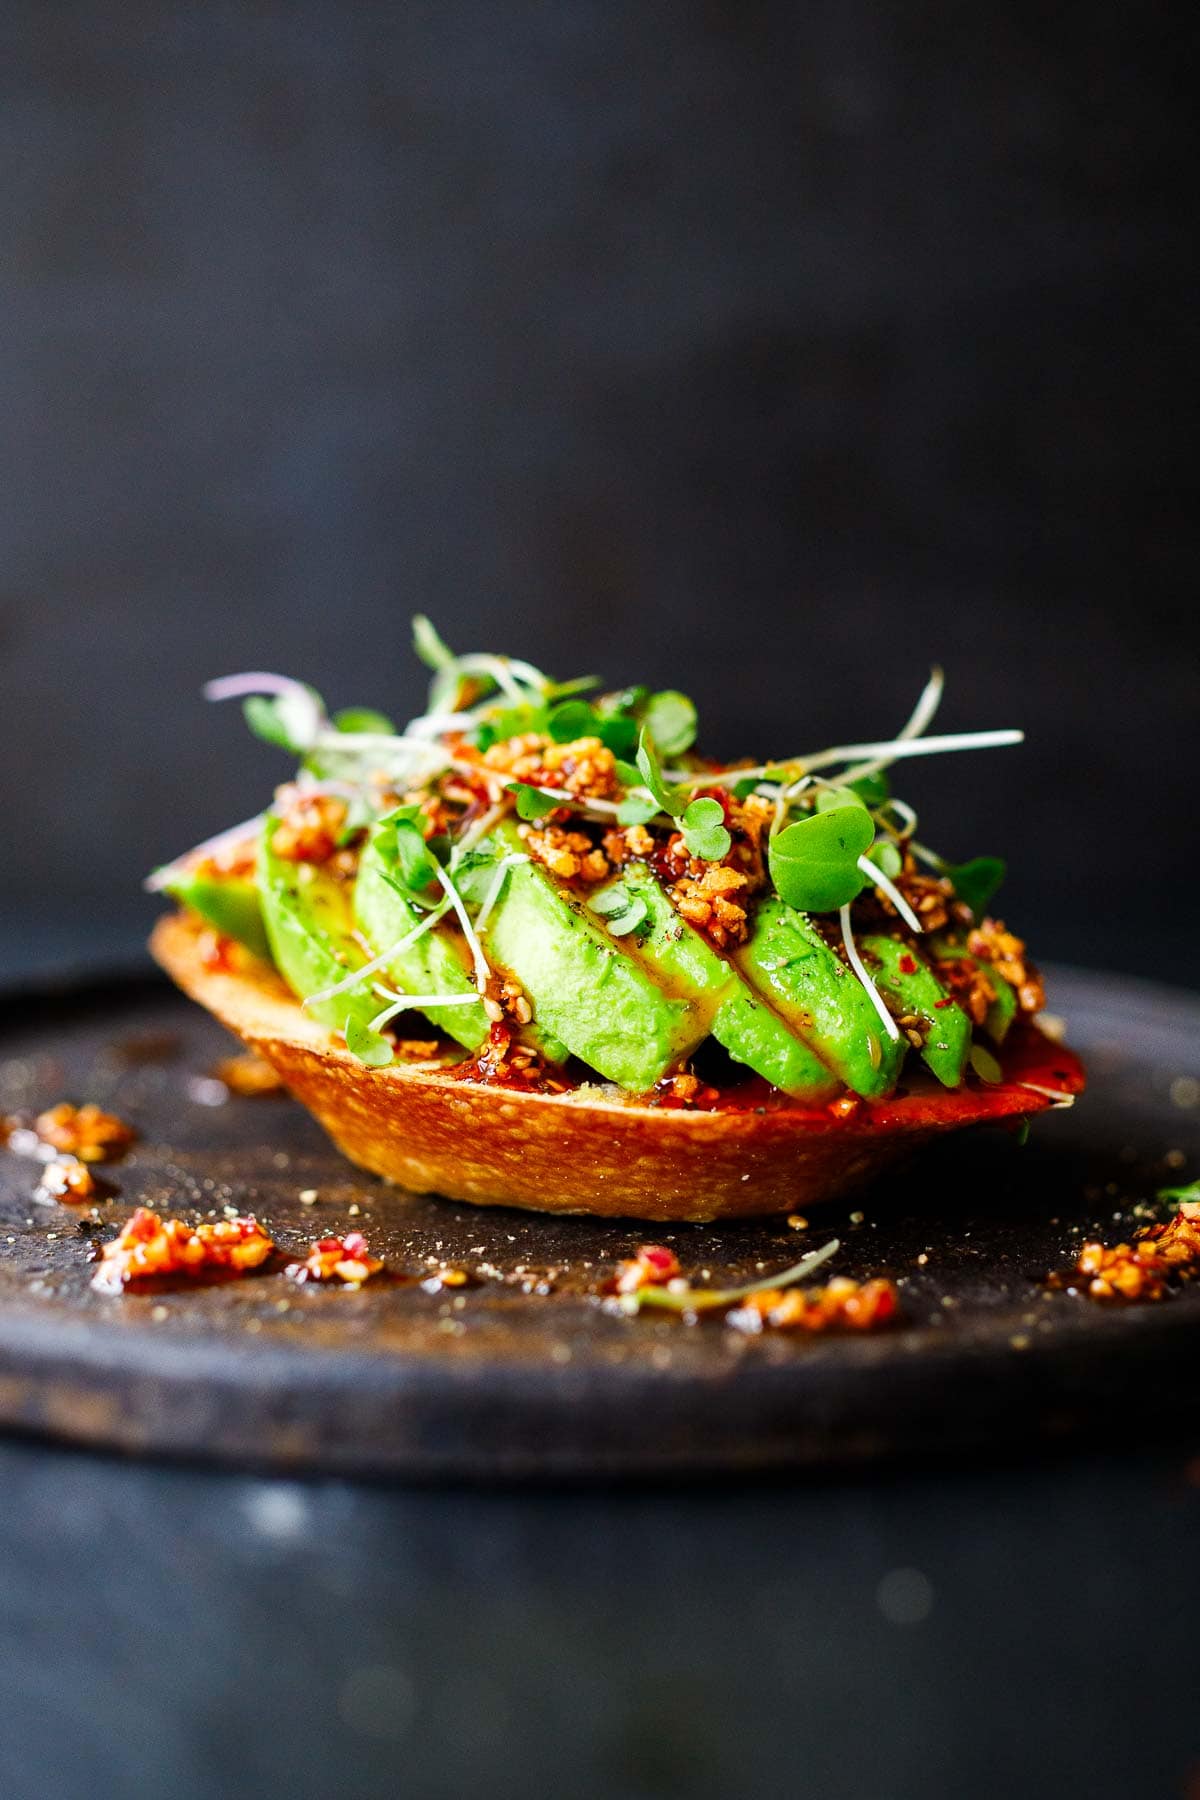 Ways to use chili crisp: Make Avocado Toast! Elevated with homemade Chili Crisp drizzled over top.